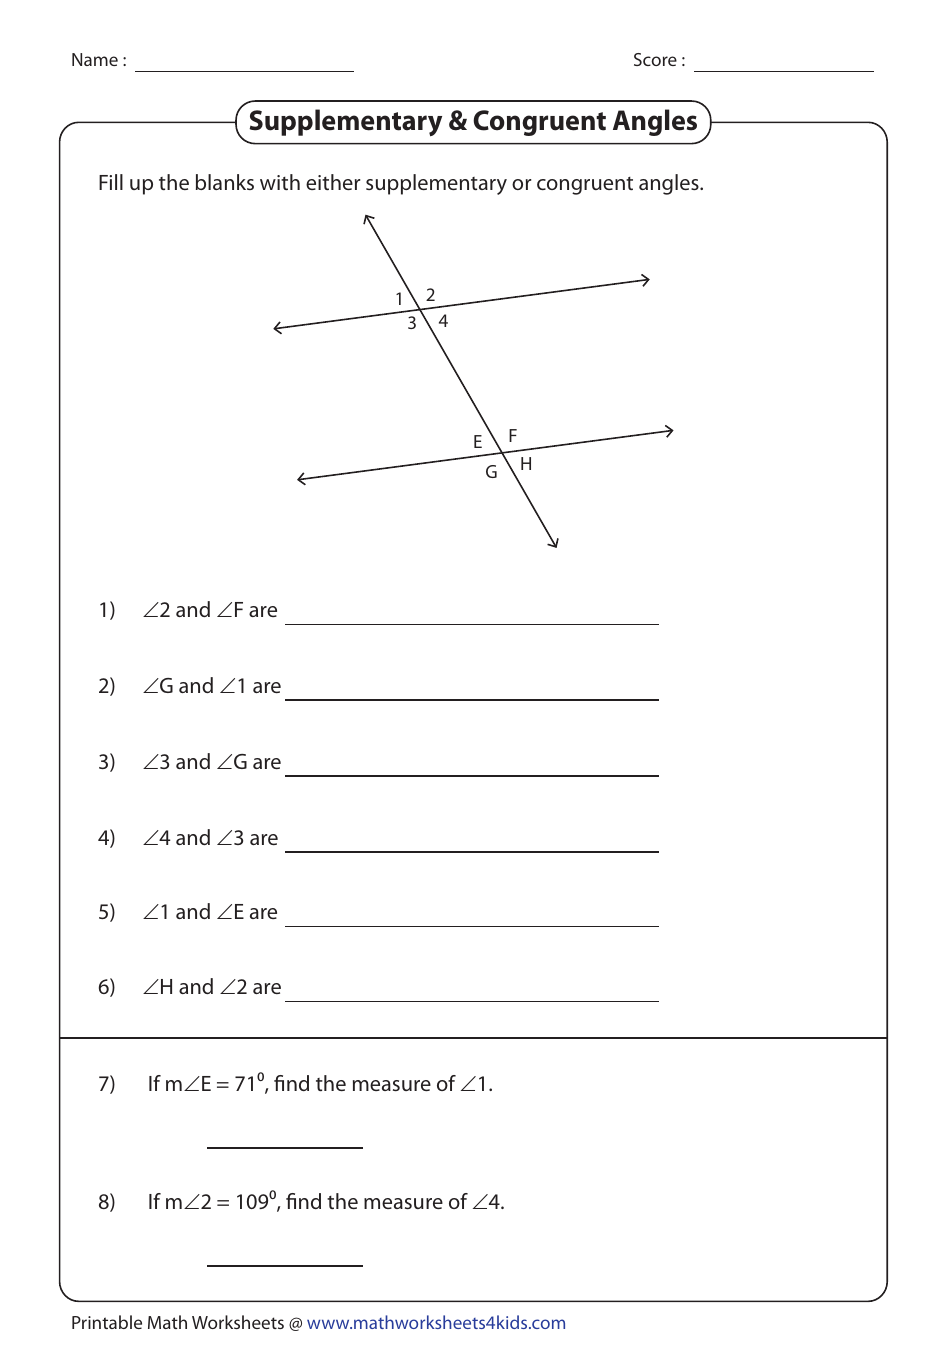 Worksheet with supplementary and congruent angles problems